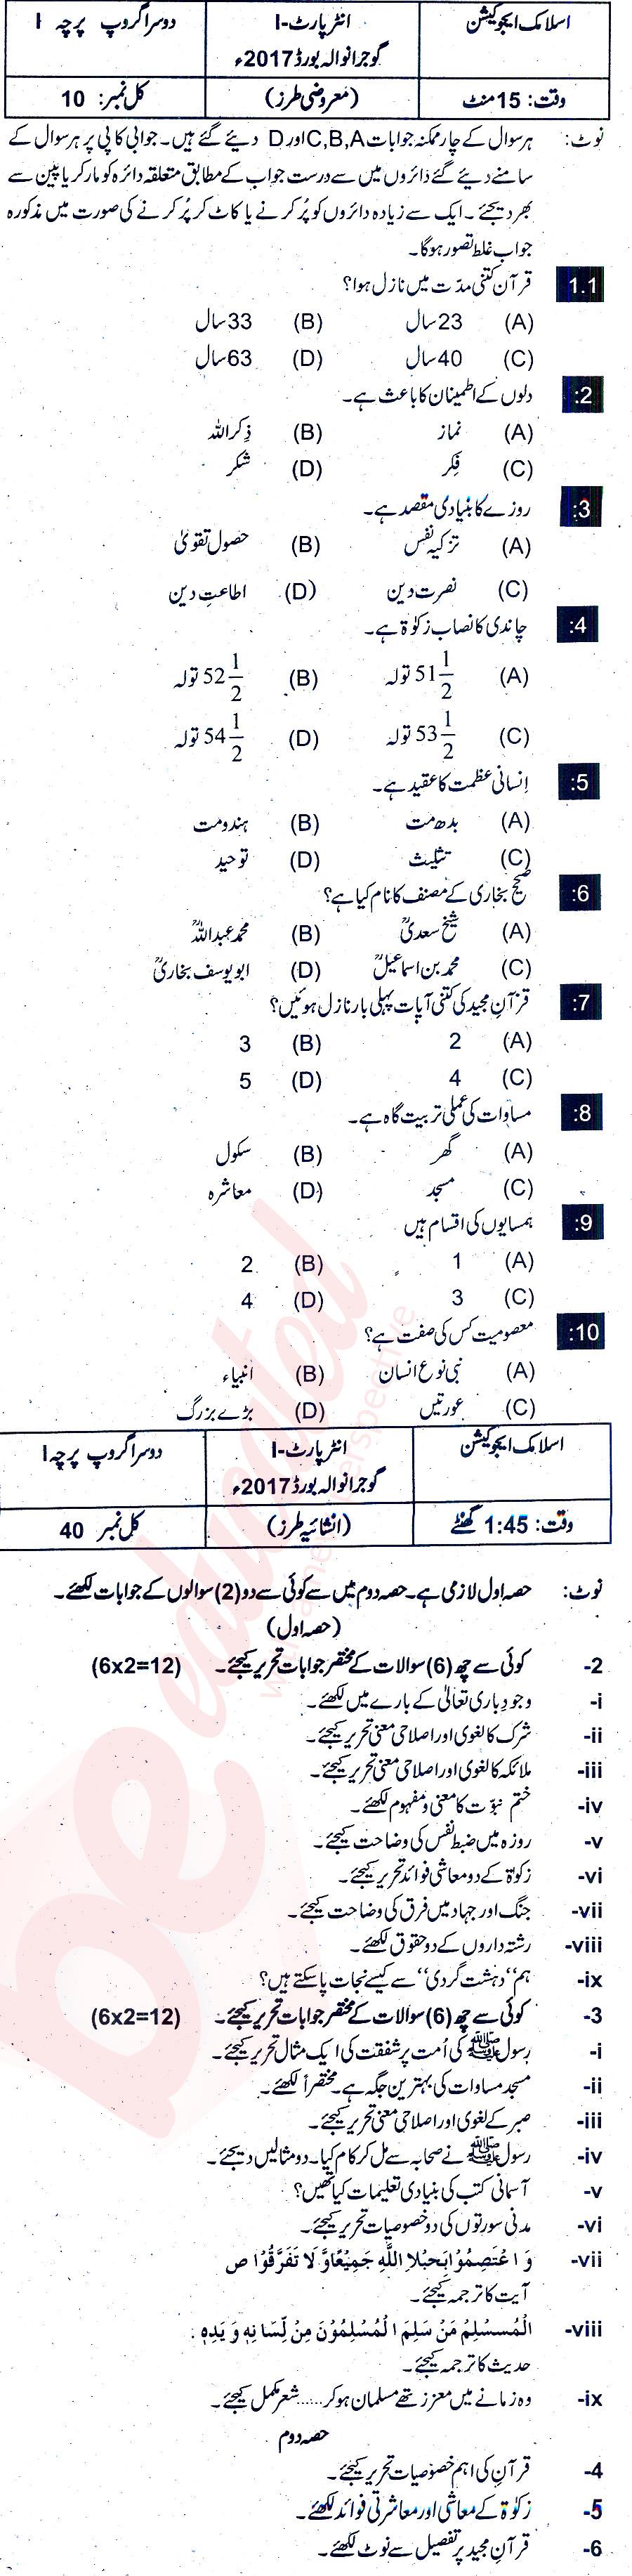 Islamic Studies 11th class Past Paper Group 2 BISE Gujranwala 2017